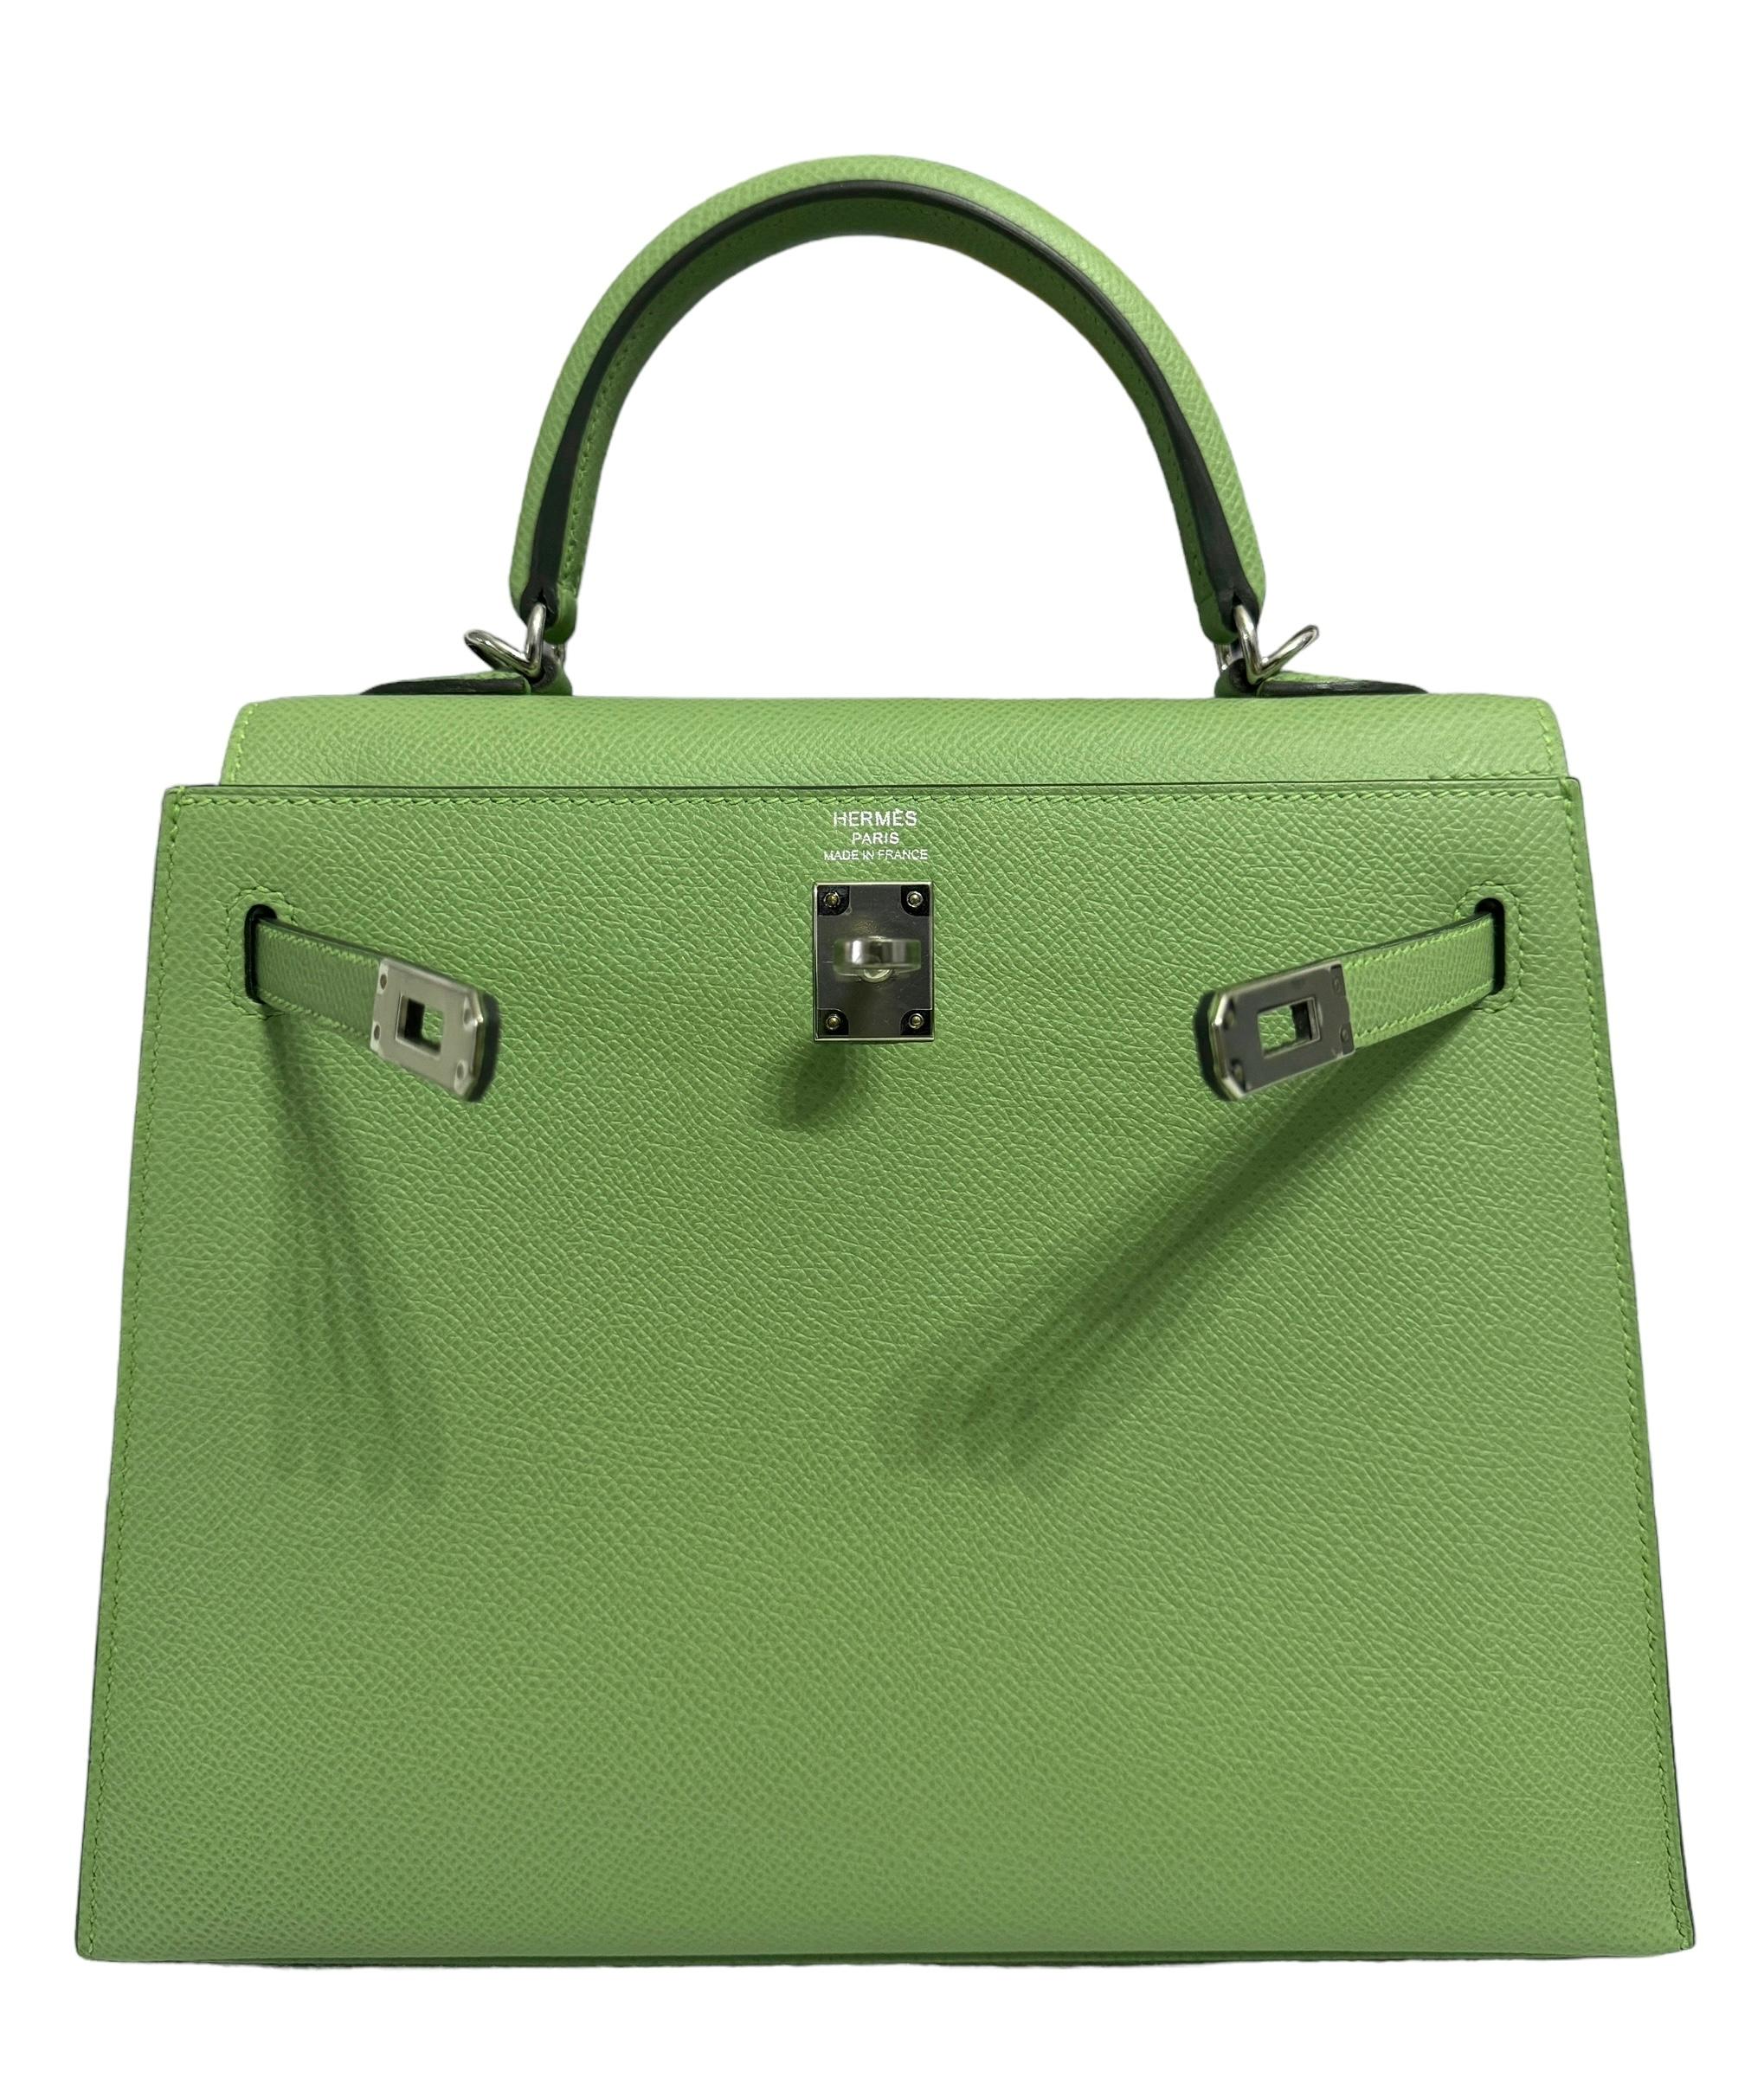 Hermes Kelly 25 Sellier Vert Criquet Green Epsom Leather Palladium Hardware RARE In New Condition For Sale In Miami, FL